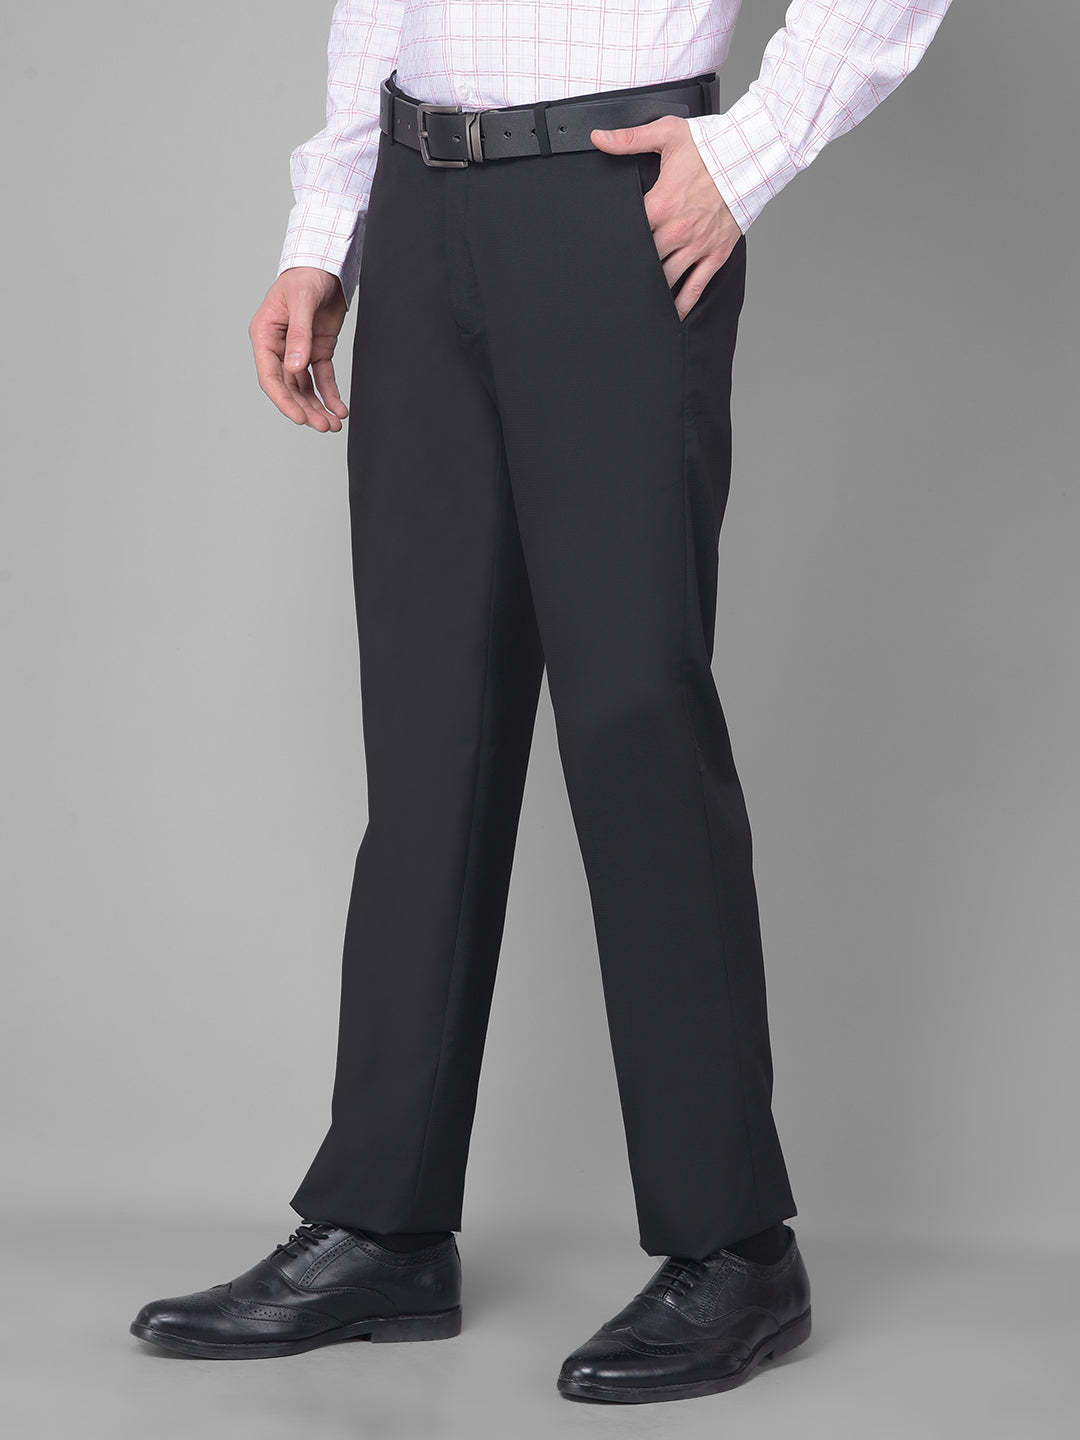 Men's Spring Fashion Solid Color Medium and Low Waist Straight Pants Suit  Pants | Wish